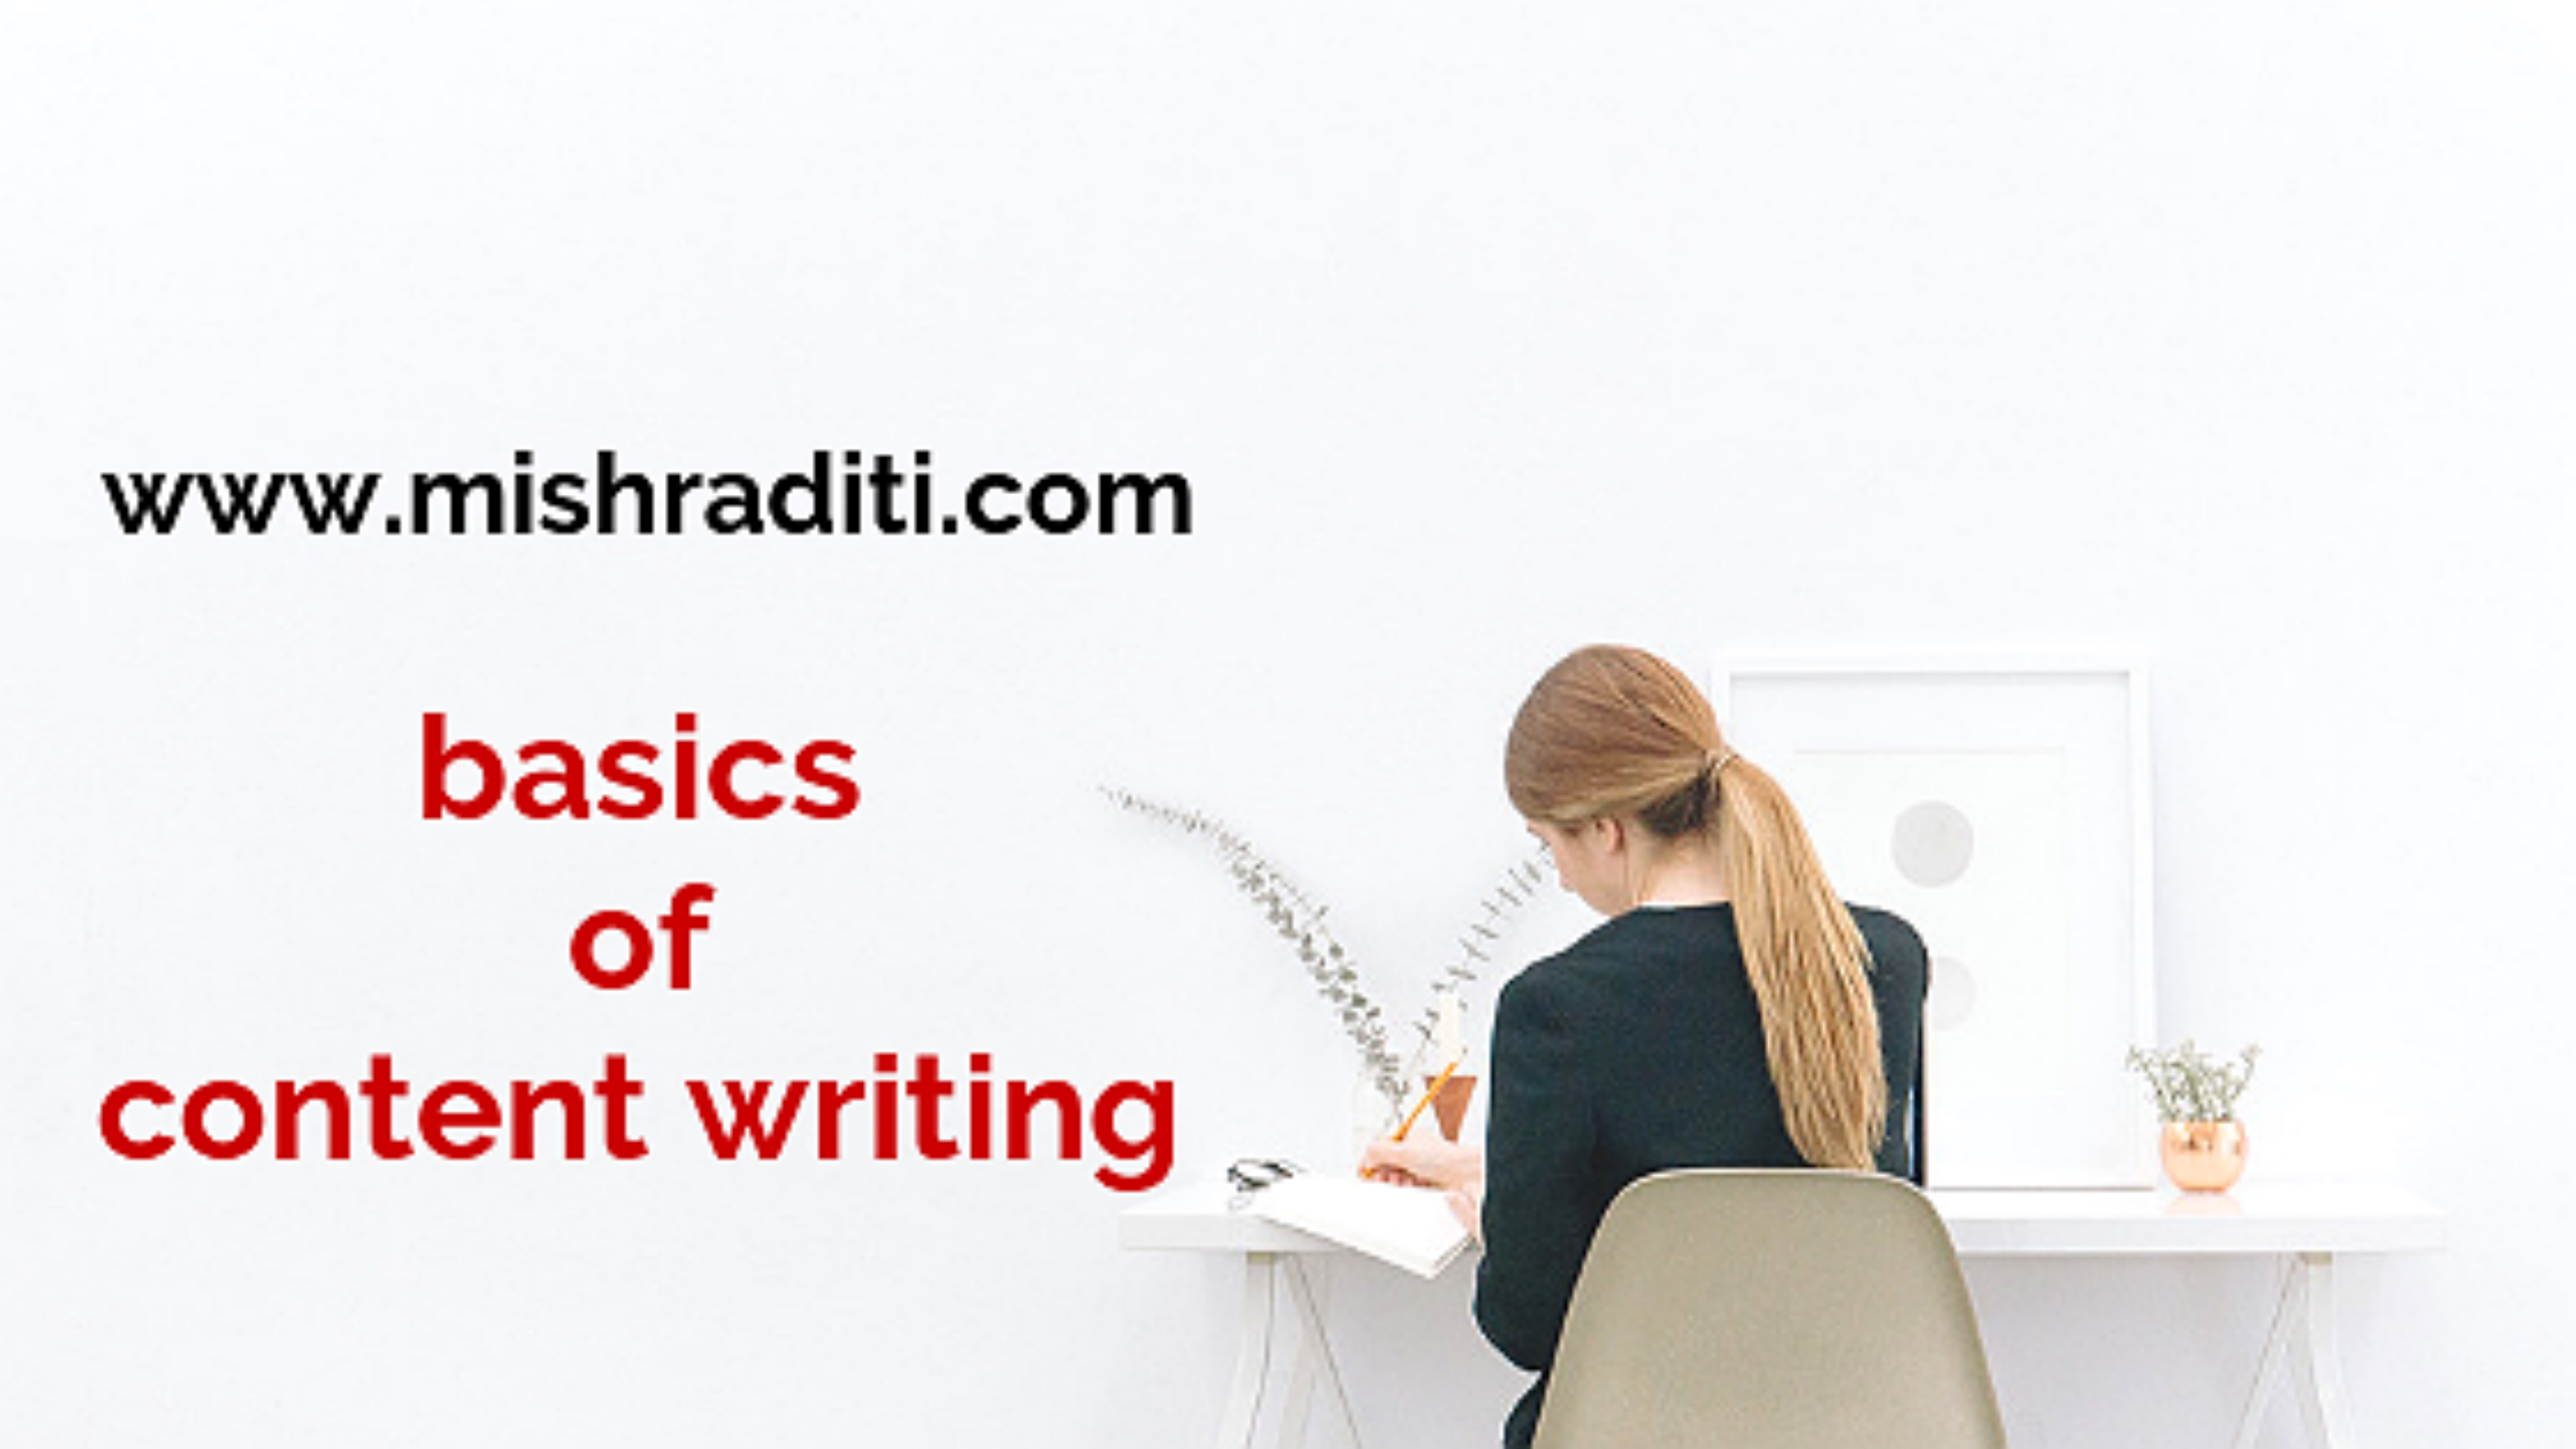 How to Get the Important Basics of Content Writing in a Simple Way